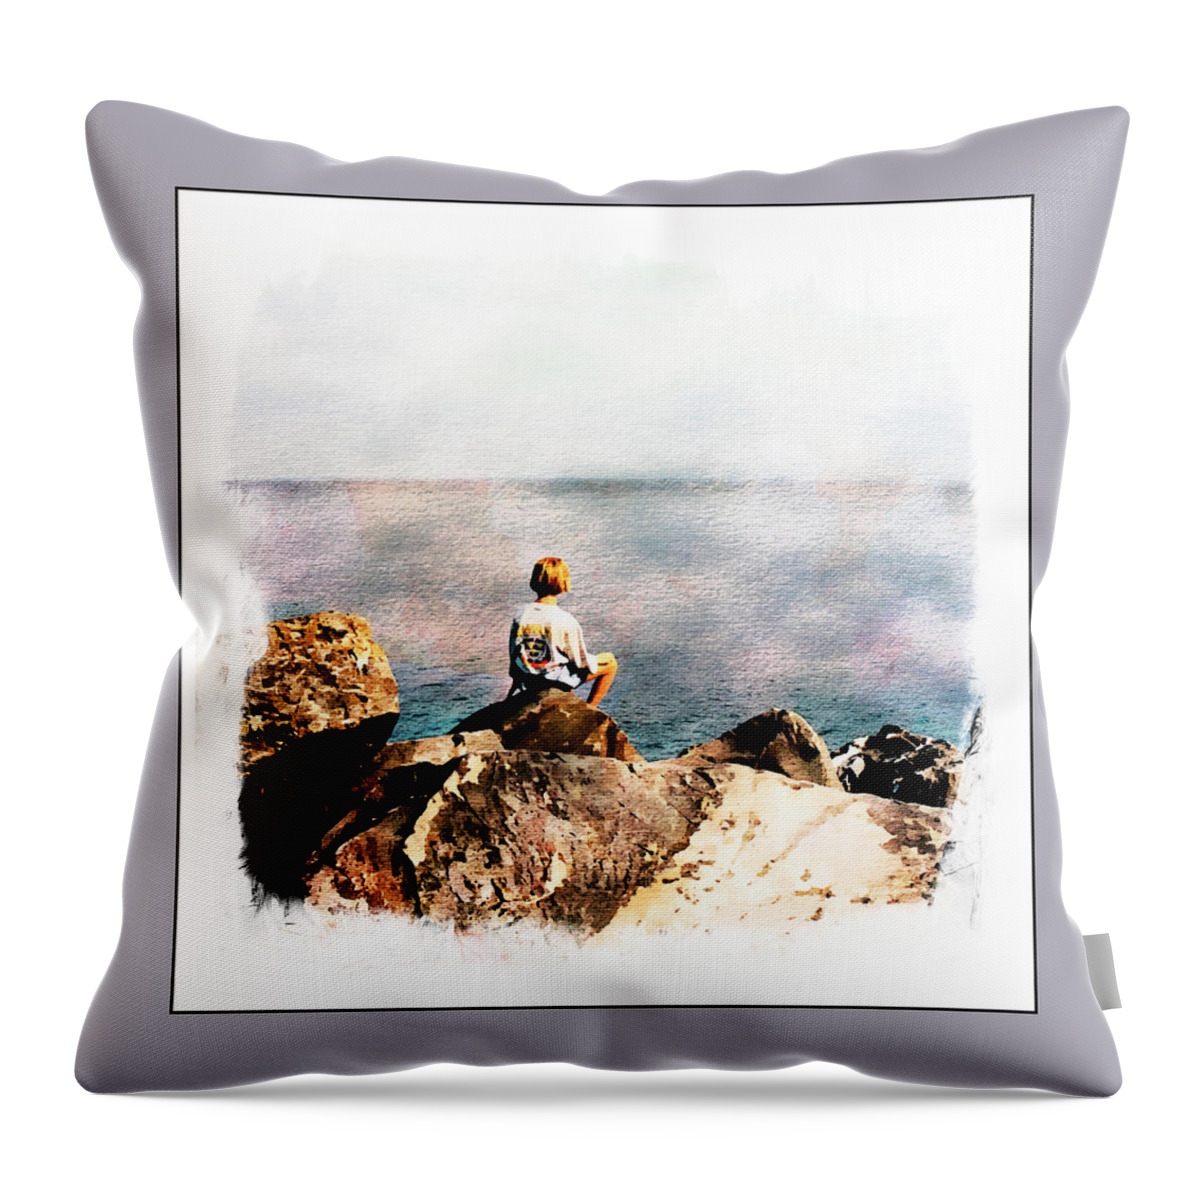 Pensive Throw Pillow featuring the photograph Contemplation by Burney Lieberman